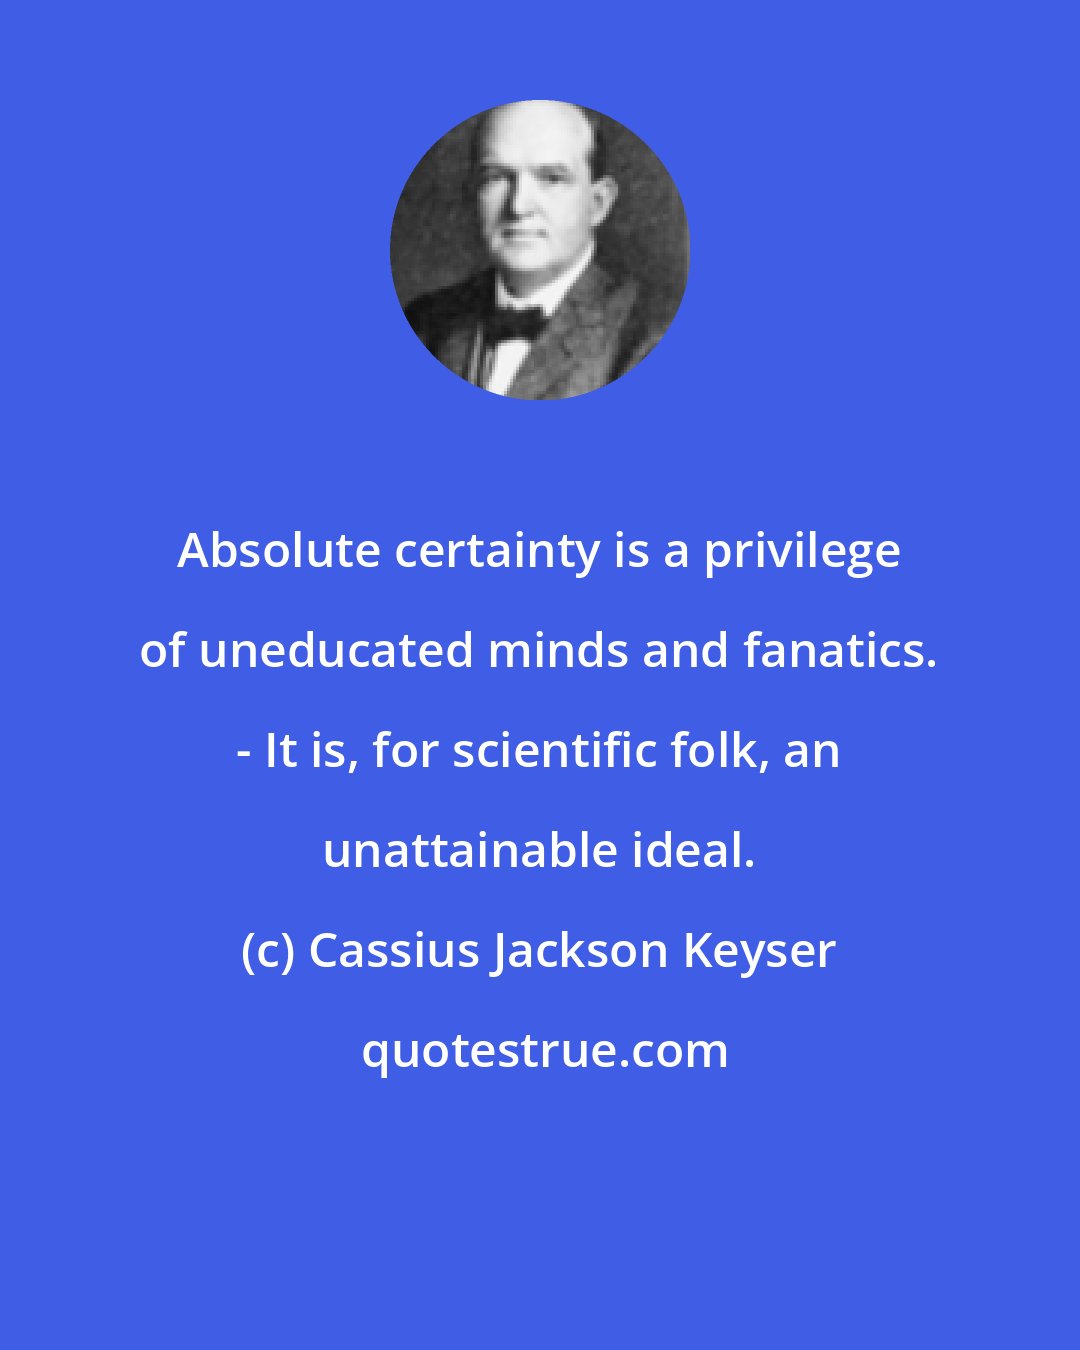 Cassius Jackson Keyser: Absolute certainty is a privilege of uneducated minds and fanatics. - It is, for scientific folk, an unattainable ideal.